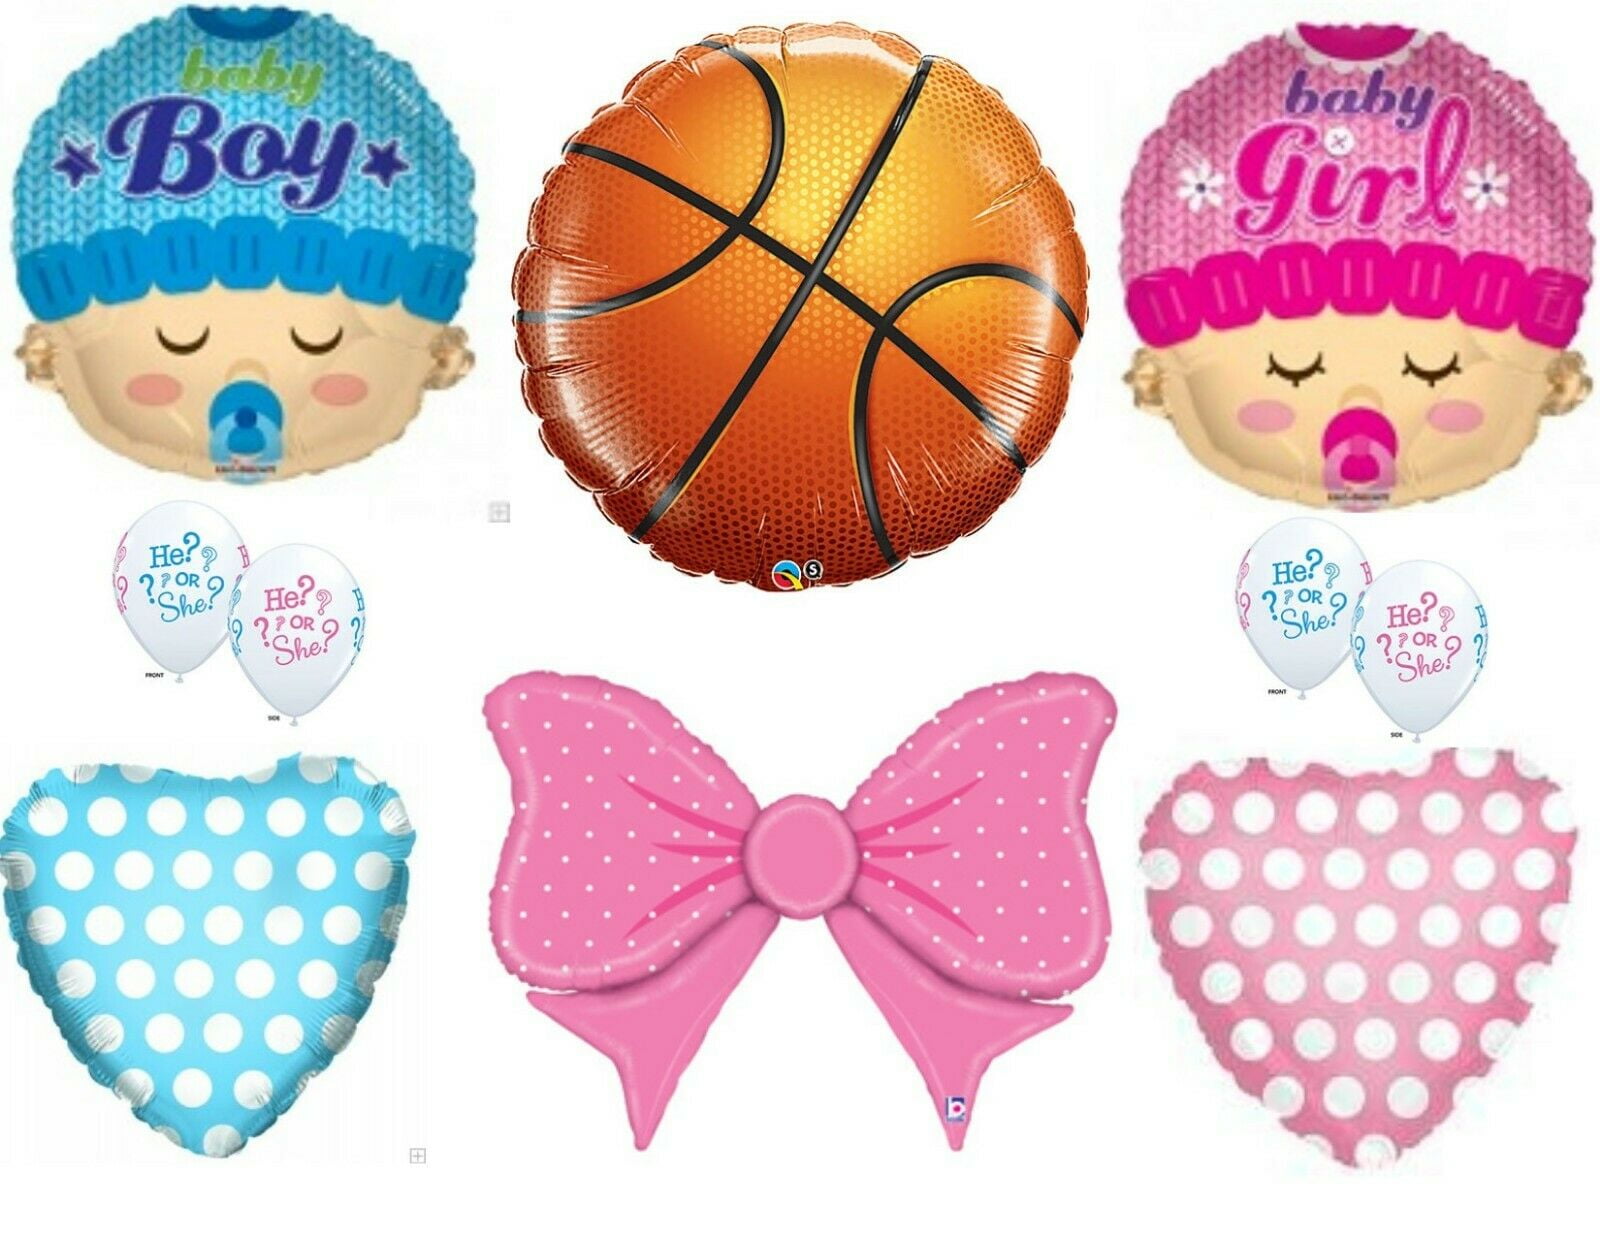 Decorations Boy or Girl Gender Reveal Party Supplies with Pink and Blue Bal...